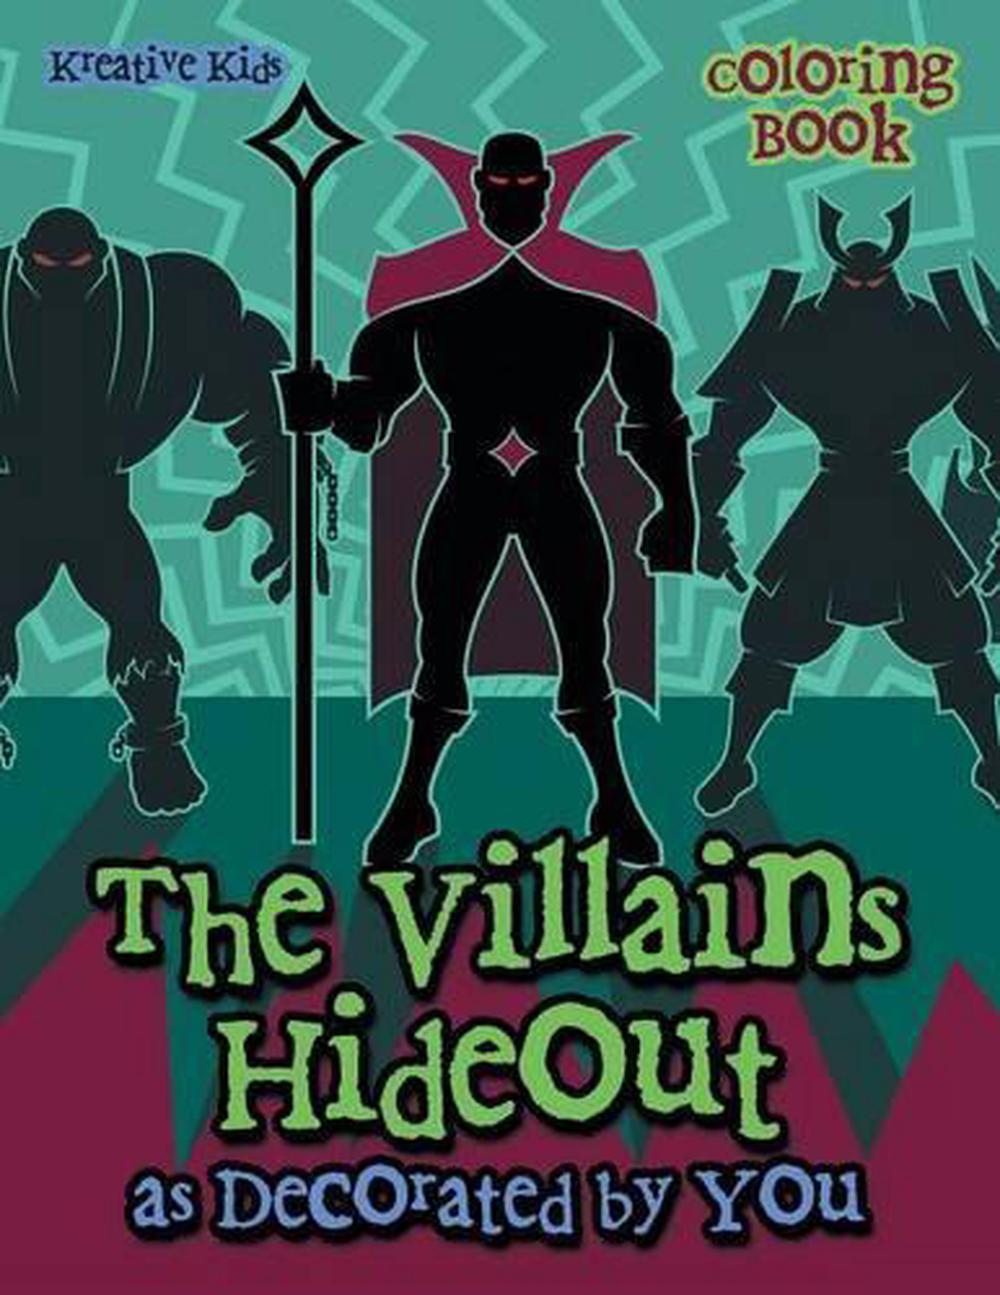 Villains Hideout As Decorated by You Coloring Book by Kreative Kids